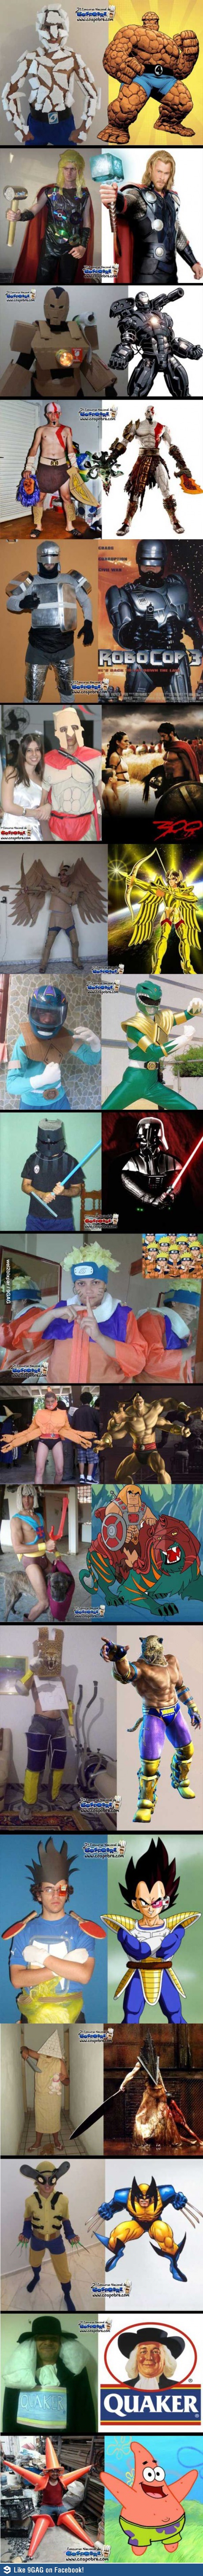 close enough, costume fail, super hero, movie character, long, compilation